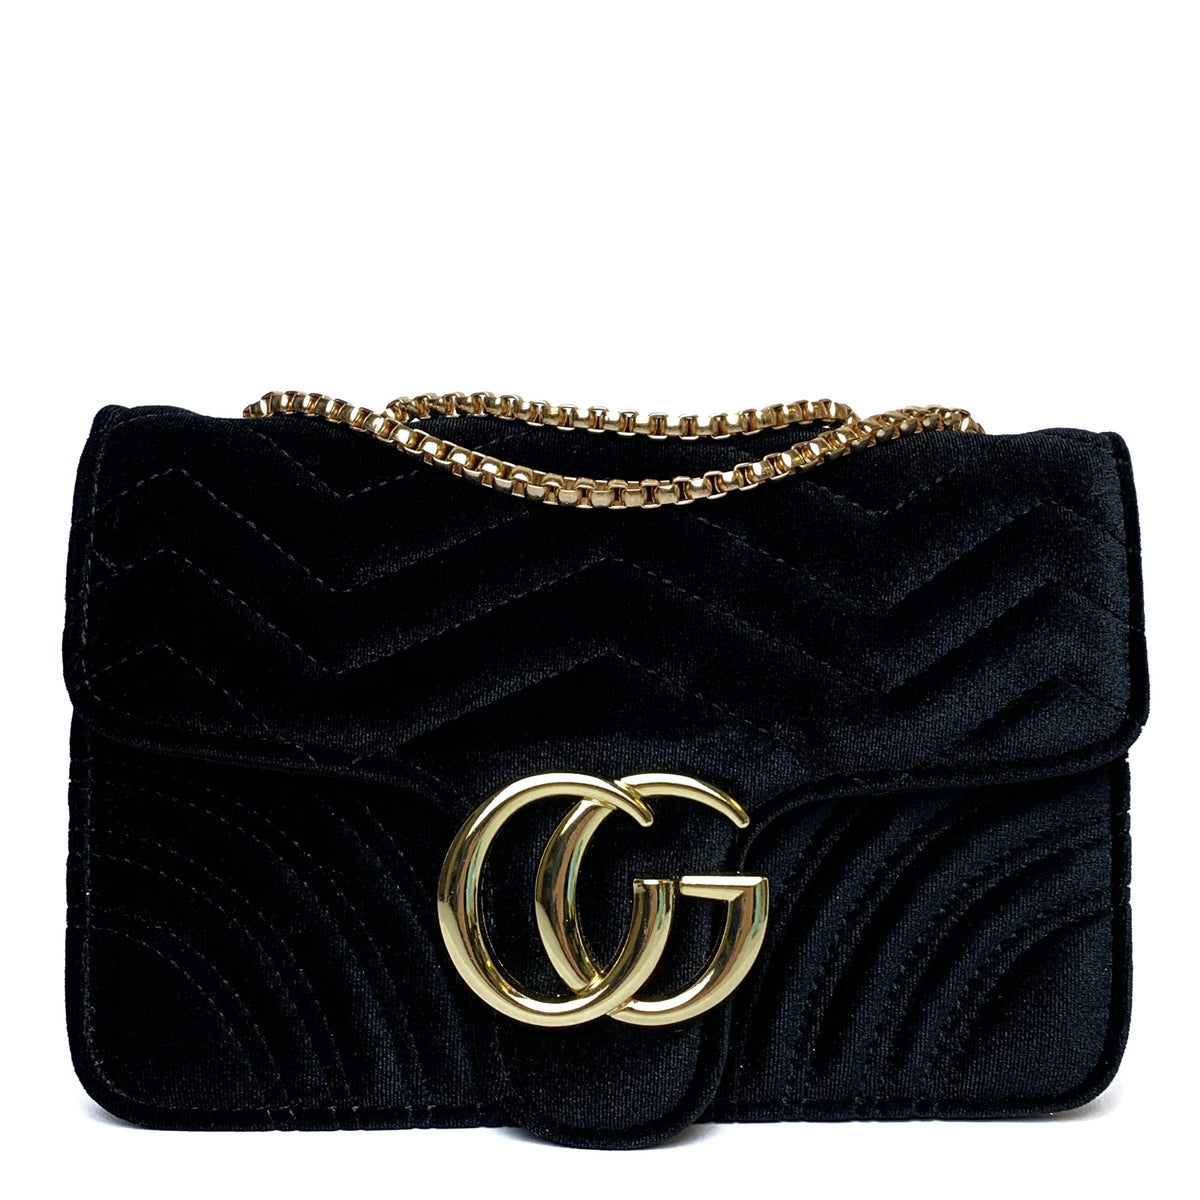 Gucci Inspired Bags – Style Of Beyond